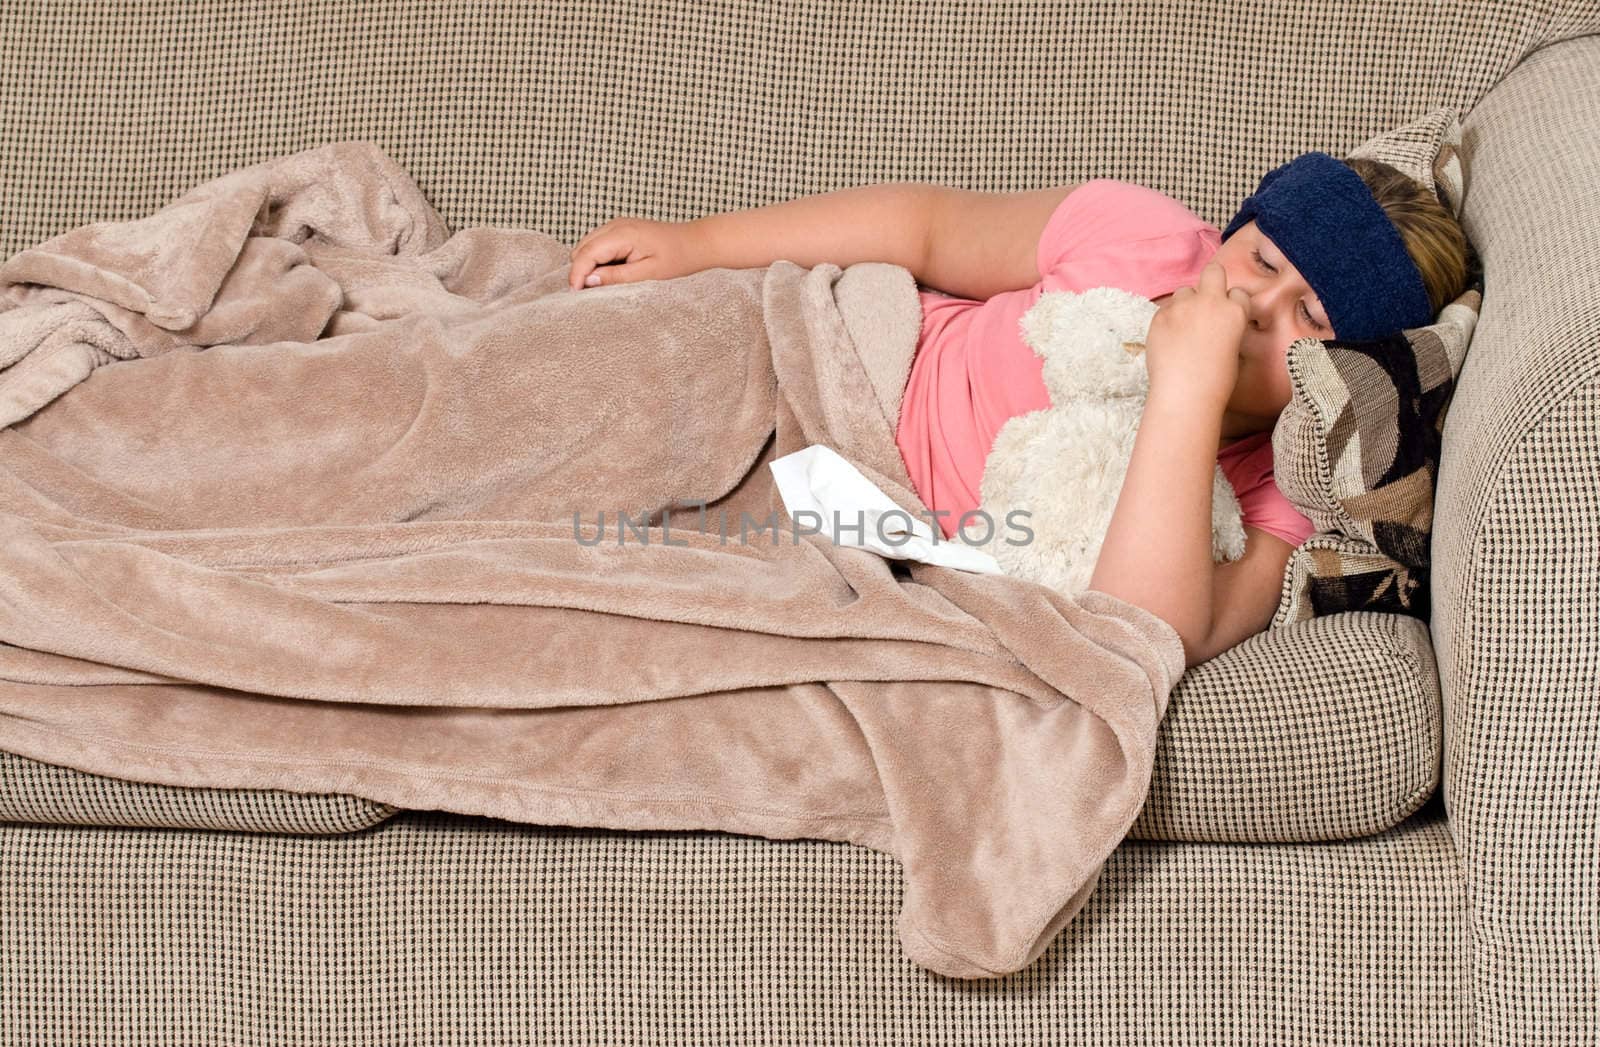 A young girl lying on the sofa feeling under the weather, and enjoying the company of her teddy bear